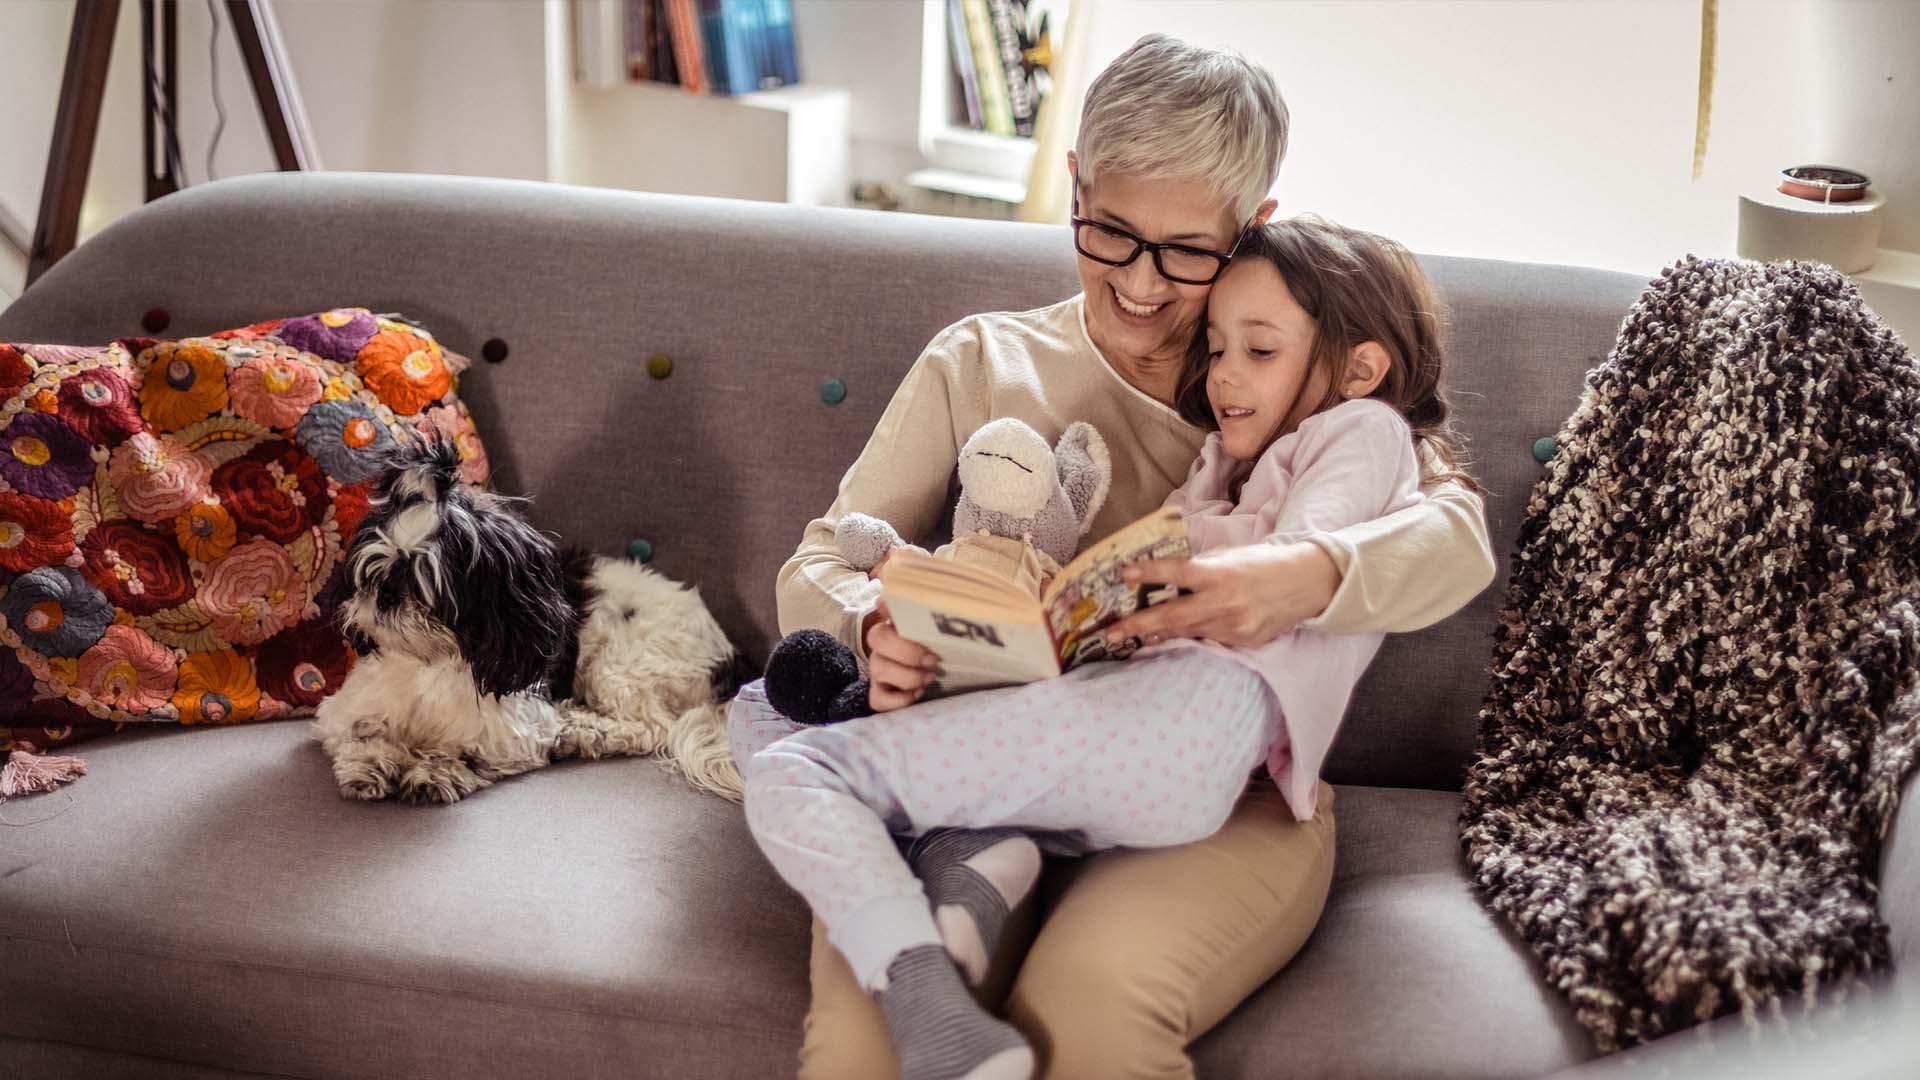 Grandmother and child reading books on the couch